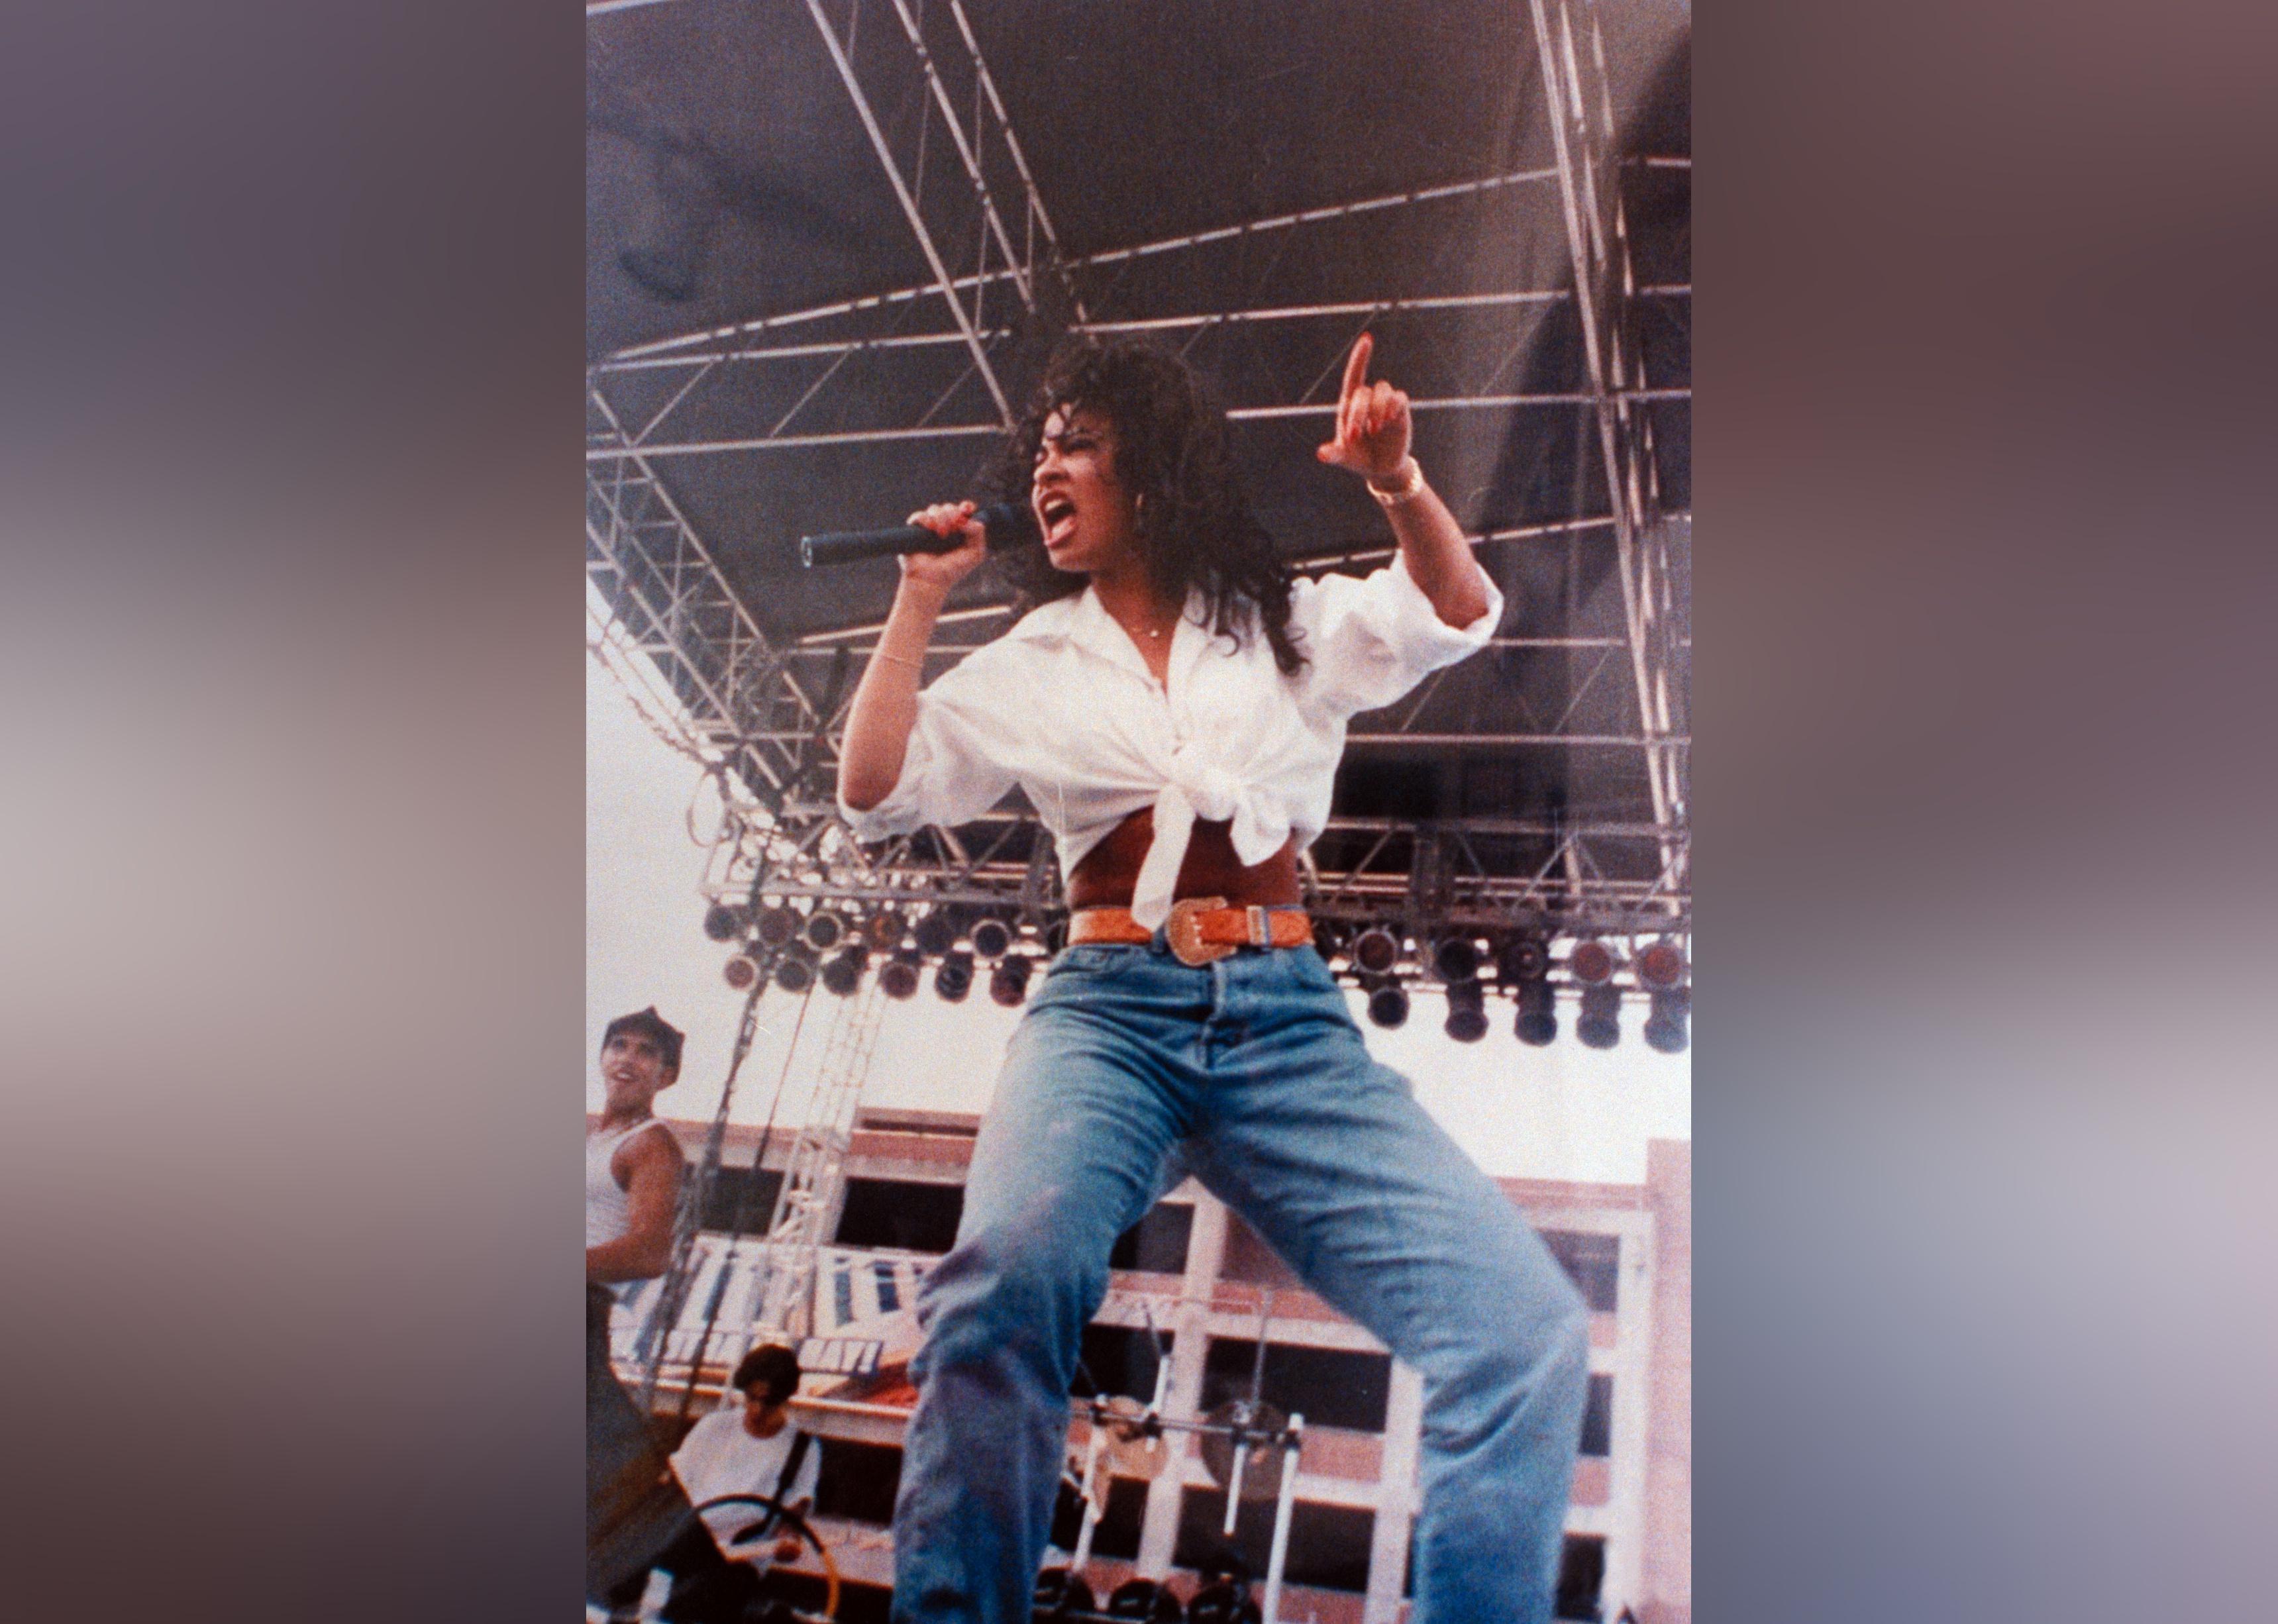 Tejano singer Selena singing into mike on outdoor stage. 